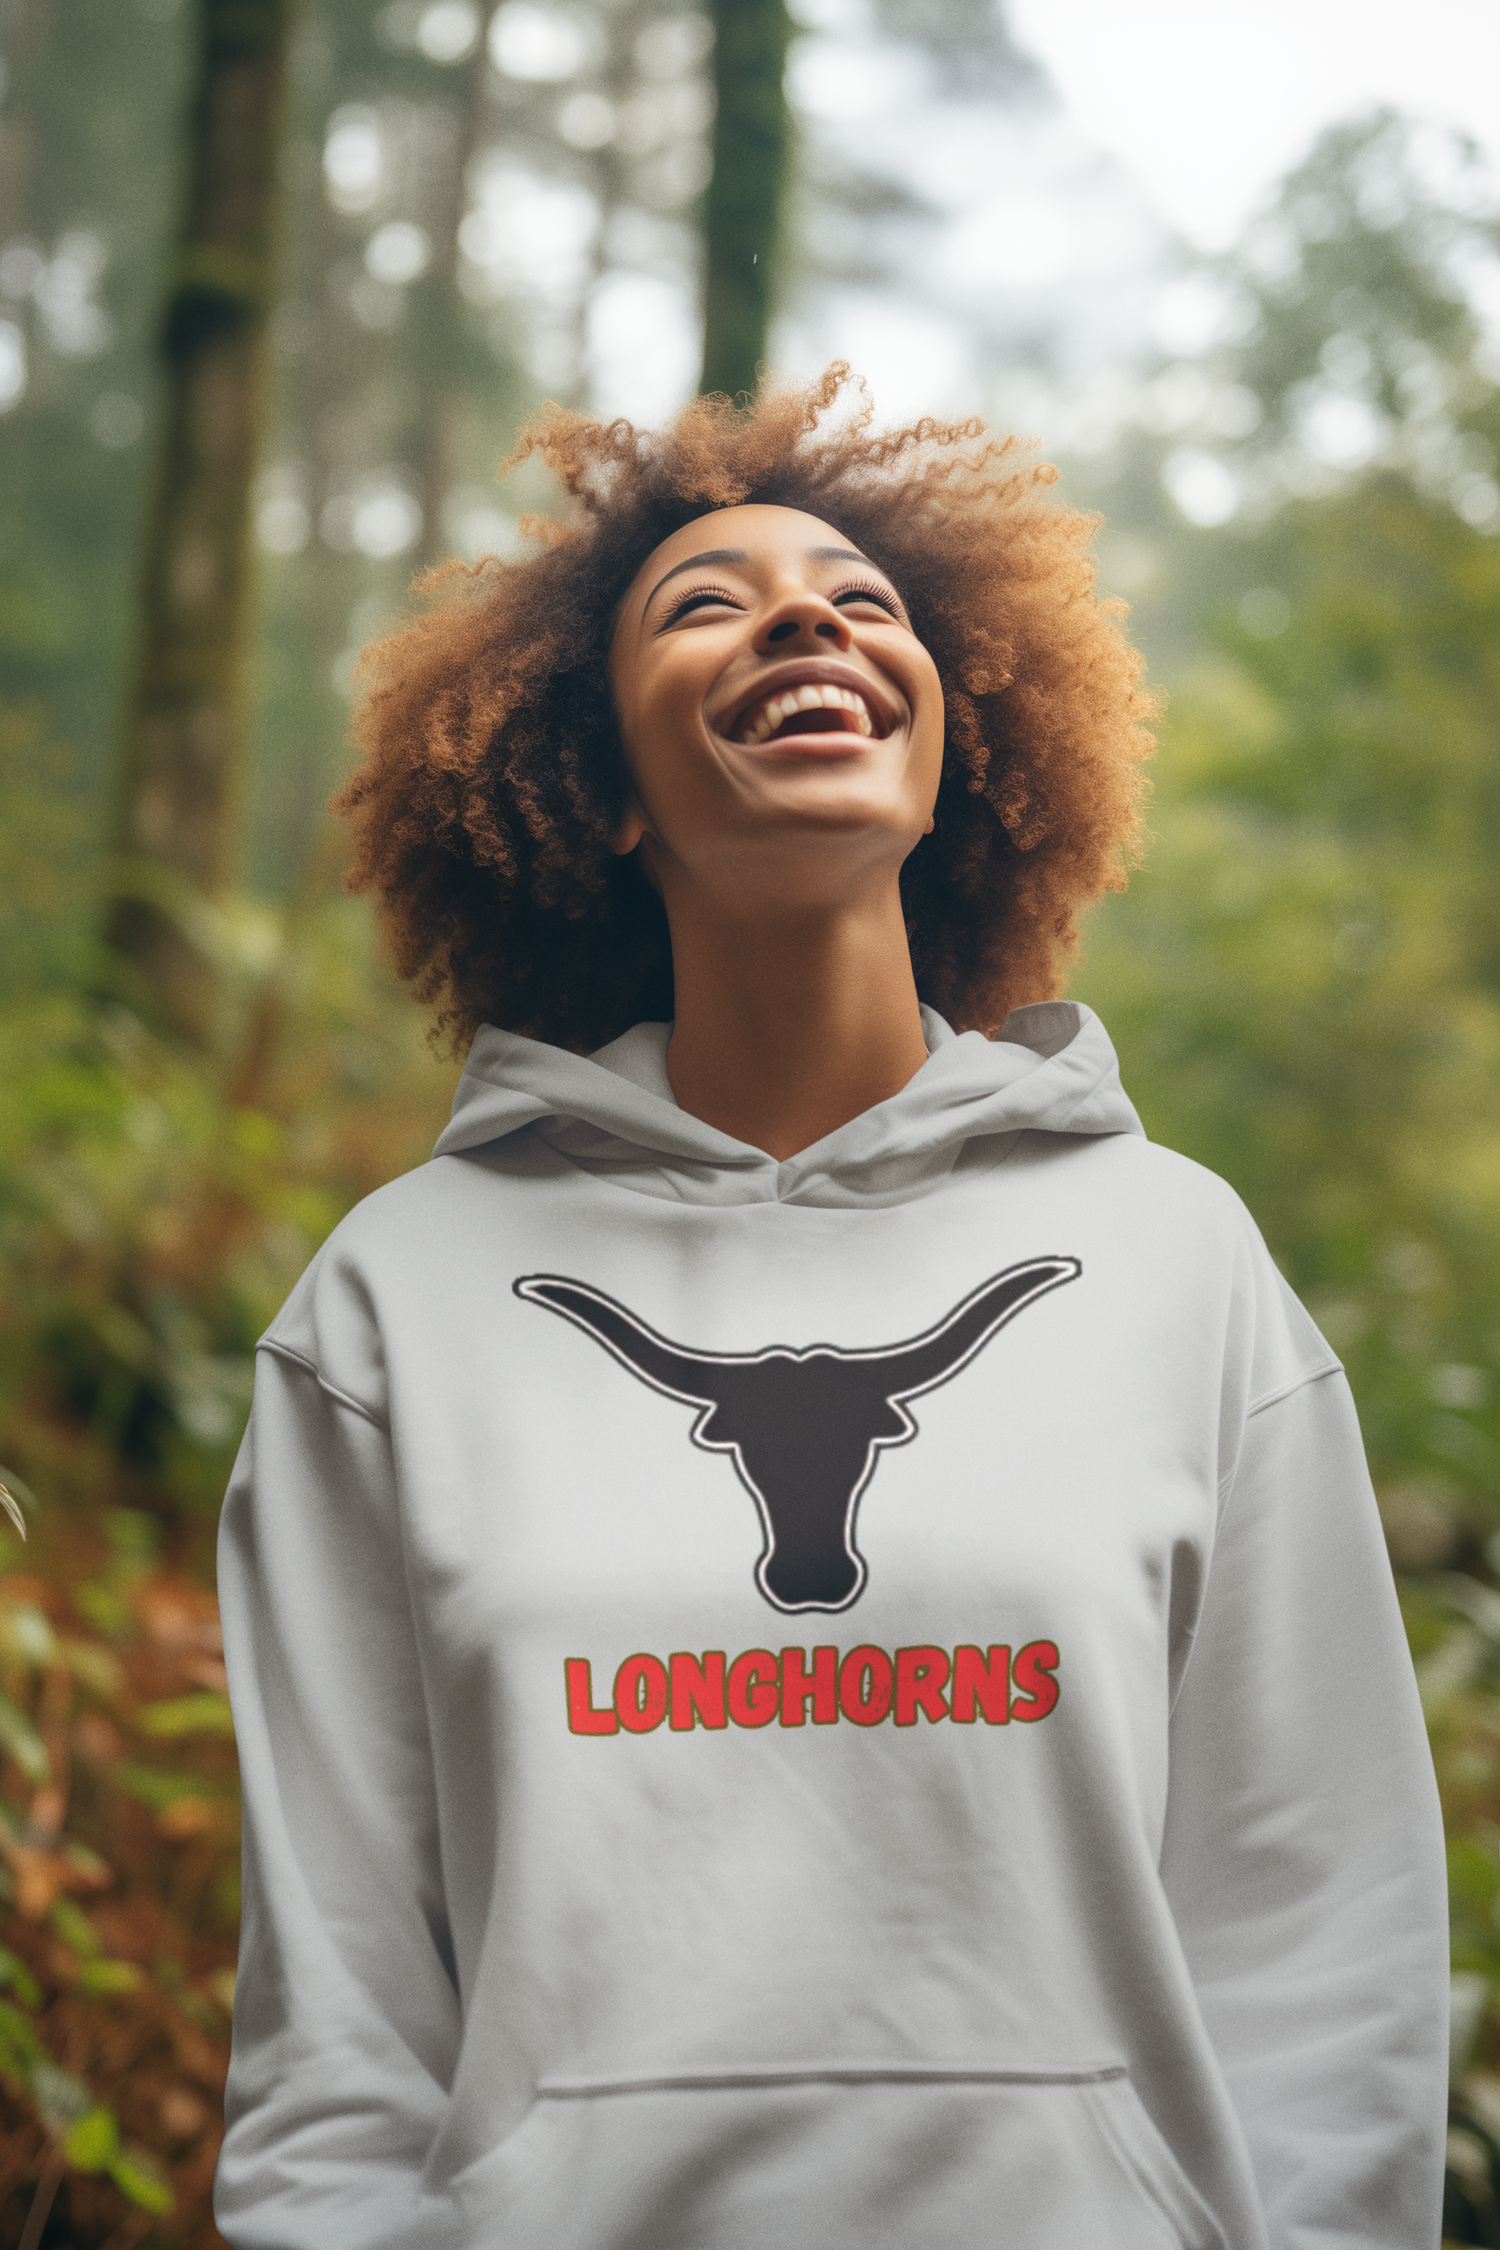 Get ready to show your school spirit with Class C Merch! Whether you need cozy hoodies for Fall football games or wicking tanks for Spring track meets, we've got you covered.